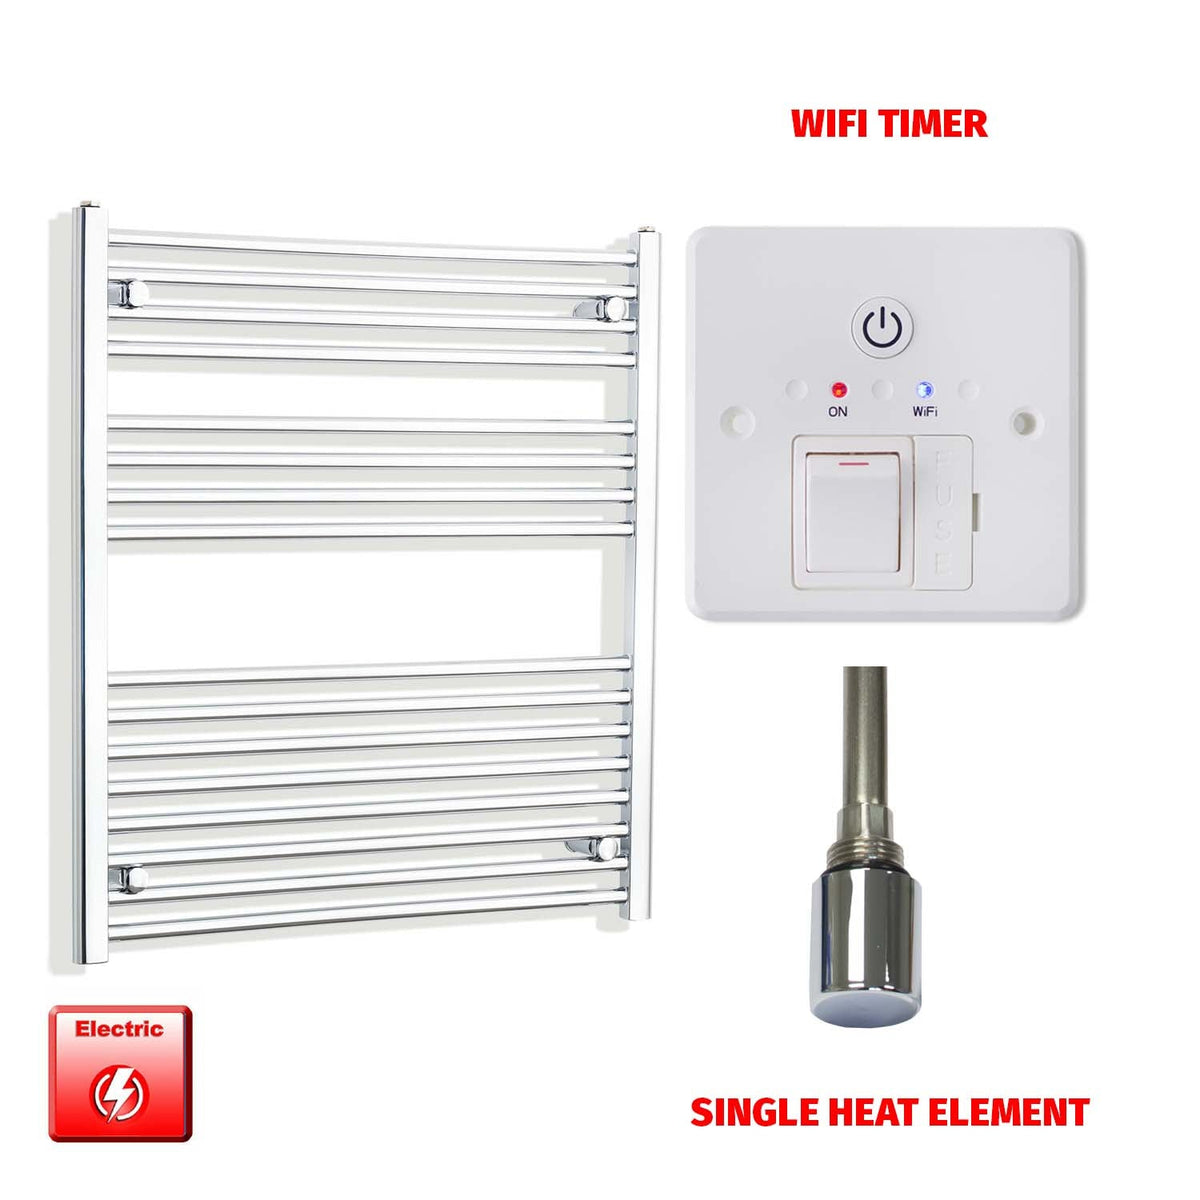 900mm High 800mm Wide Pre-Filled Electric Heated Towel Rail Radiator Straight Chrome Single heat element Wifi timer